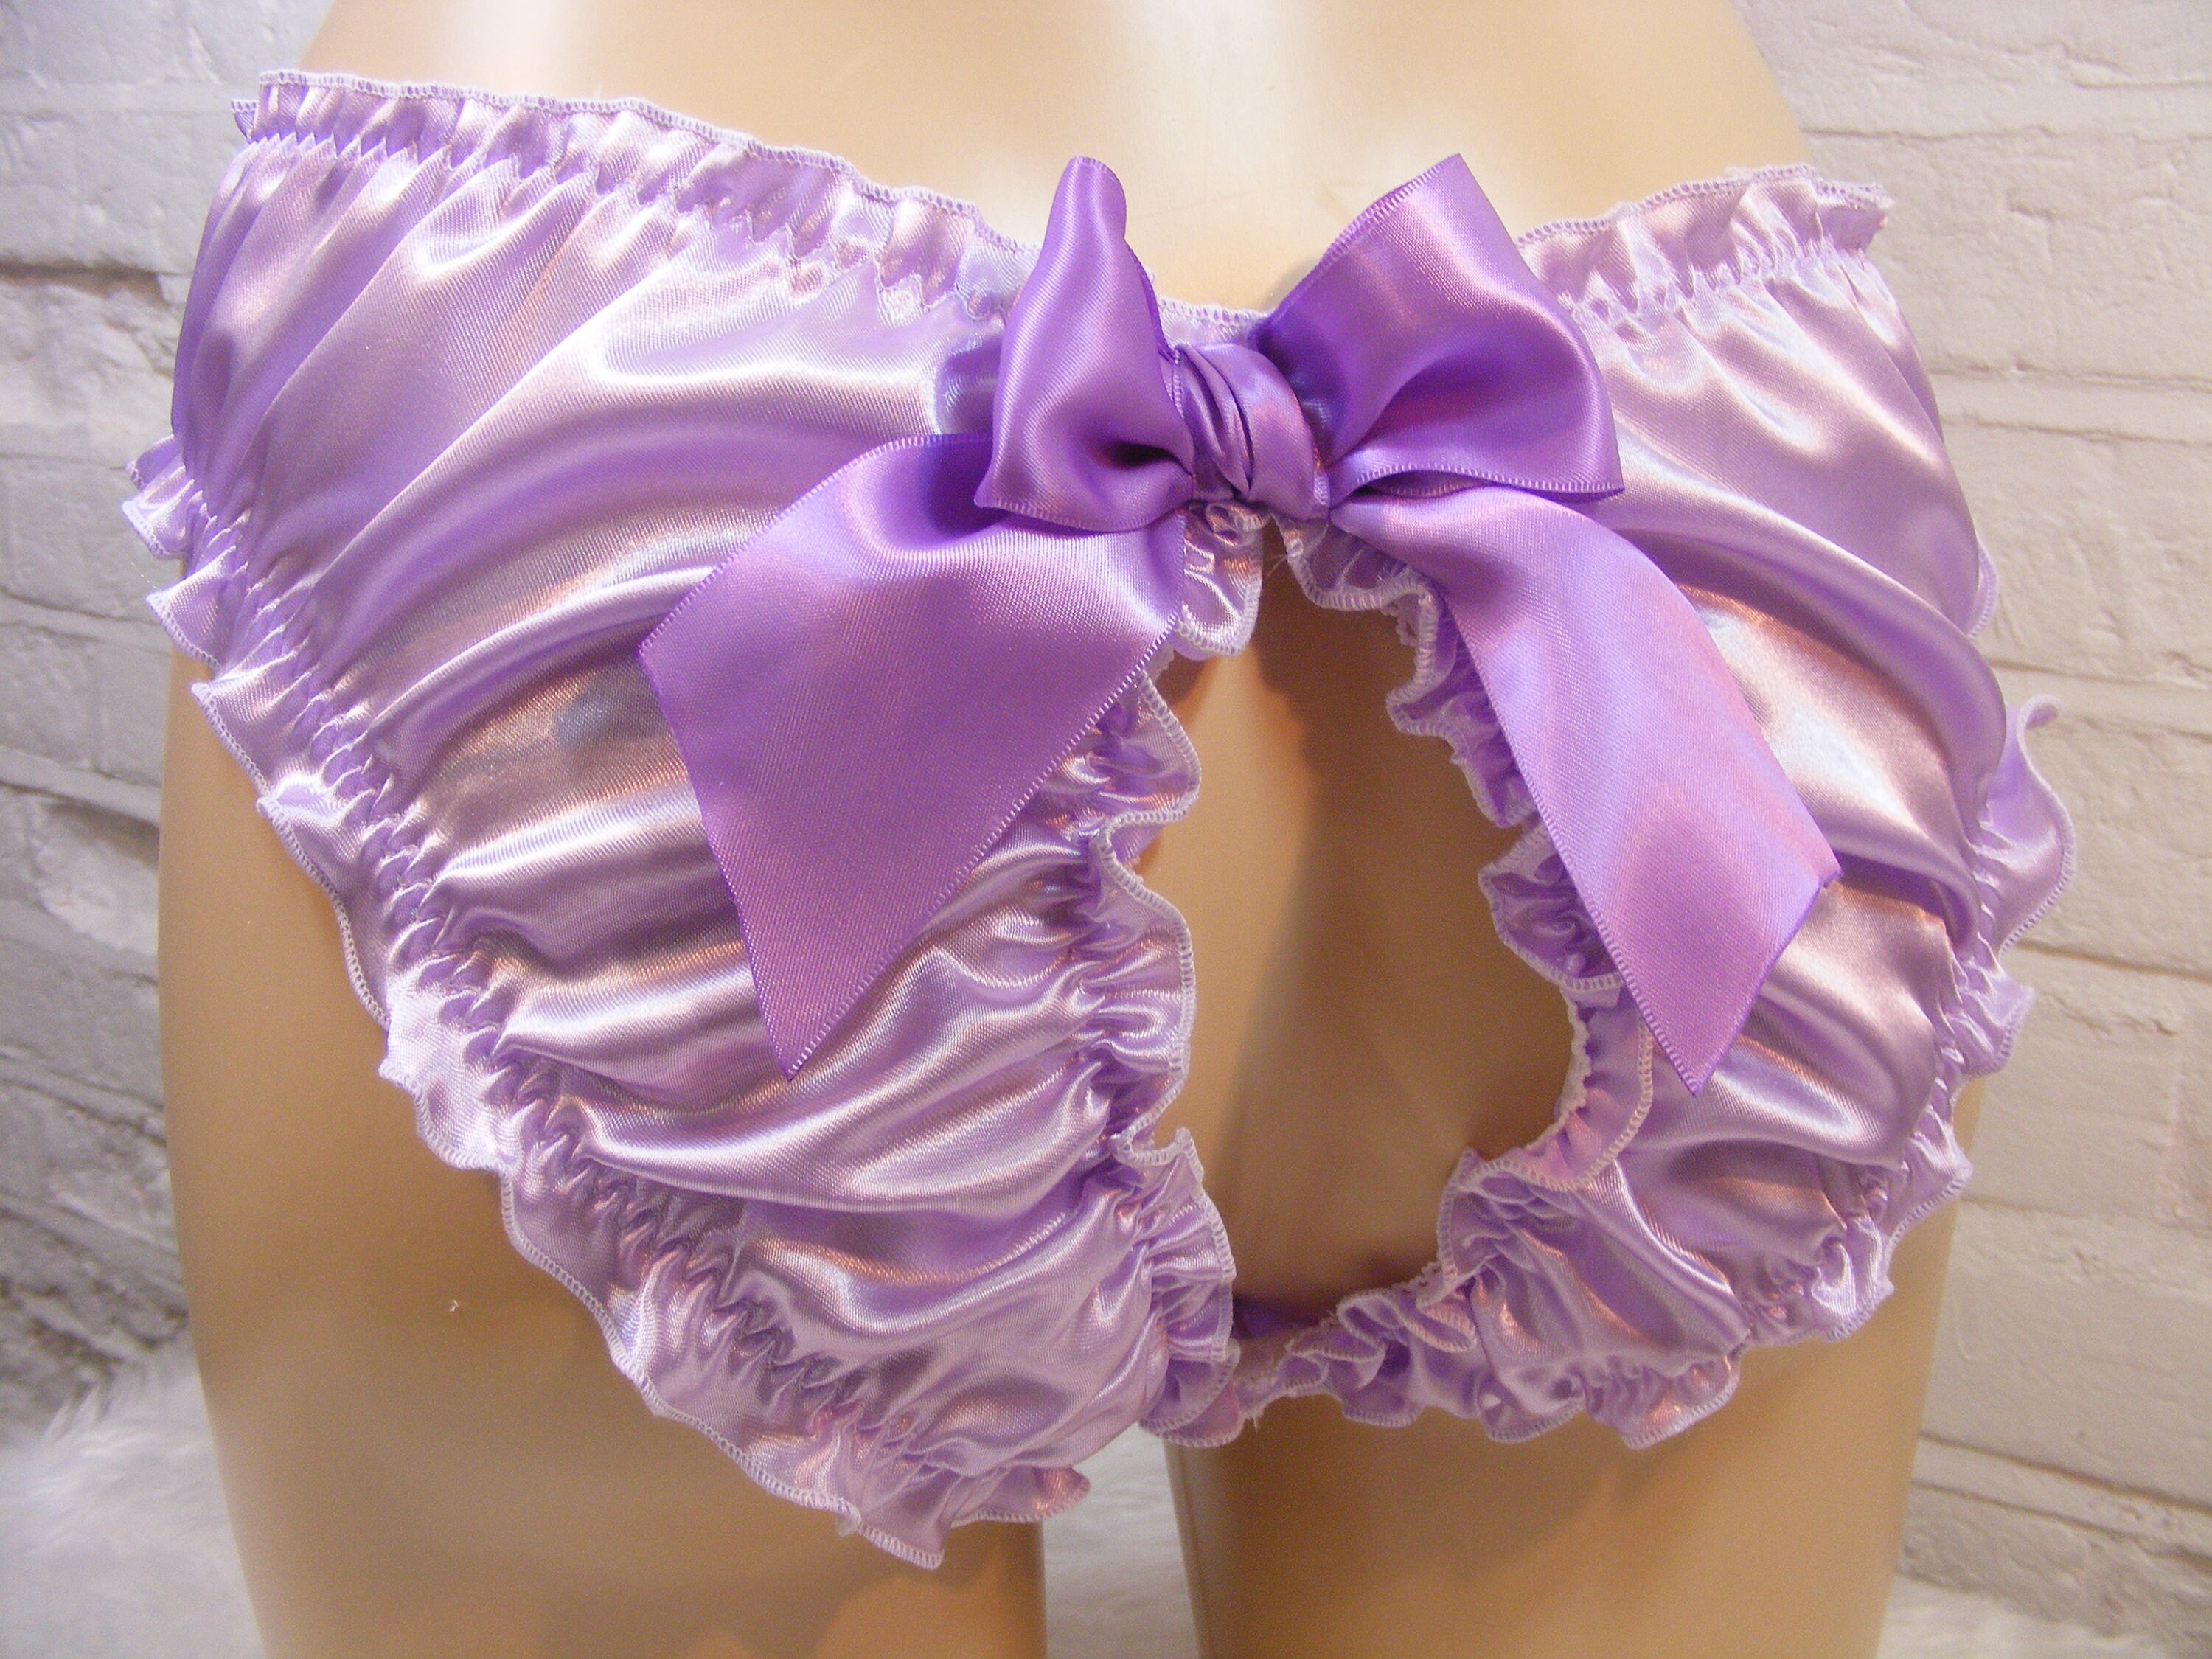 sissy  silky satin open butt panties mens lingerie knickers all sizes colours